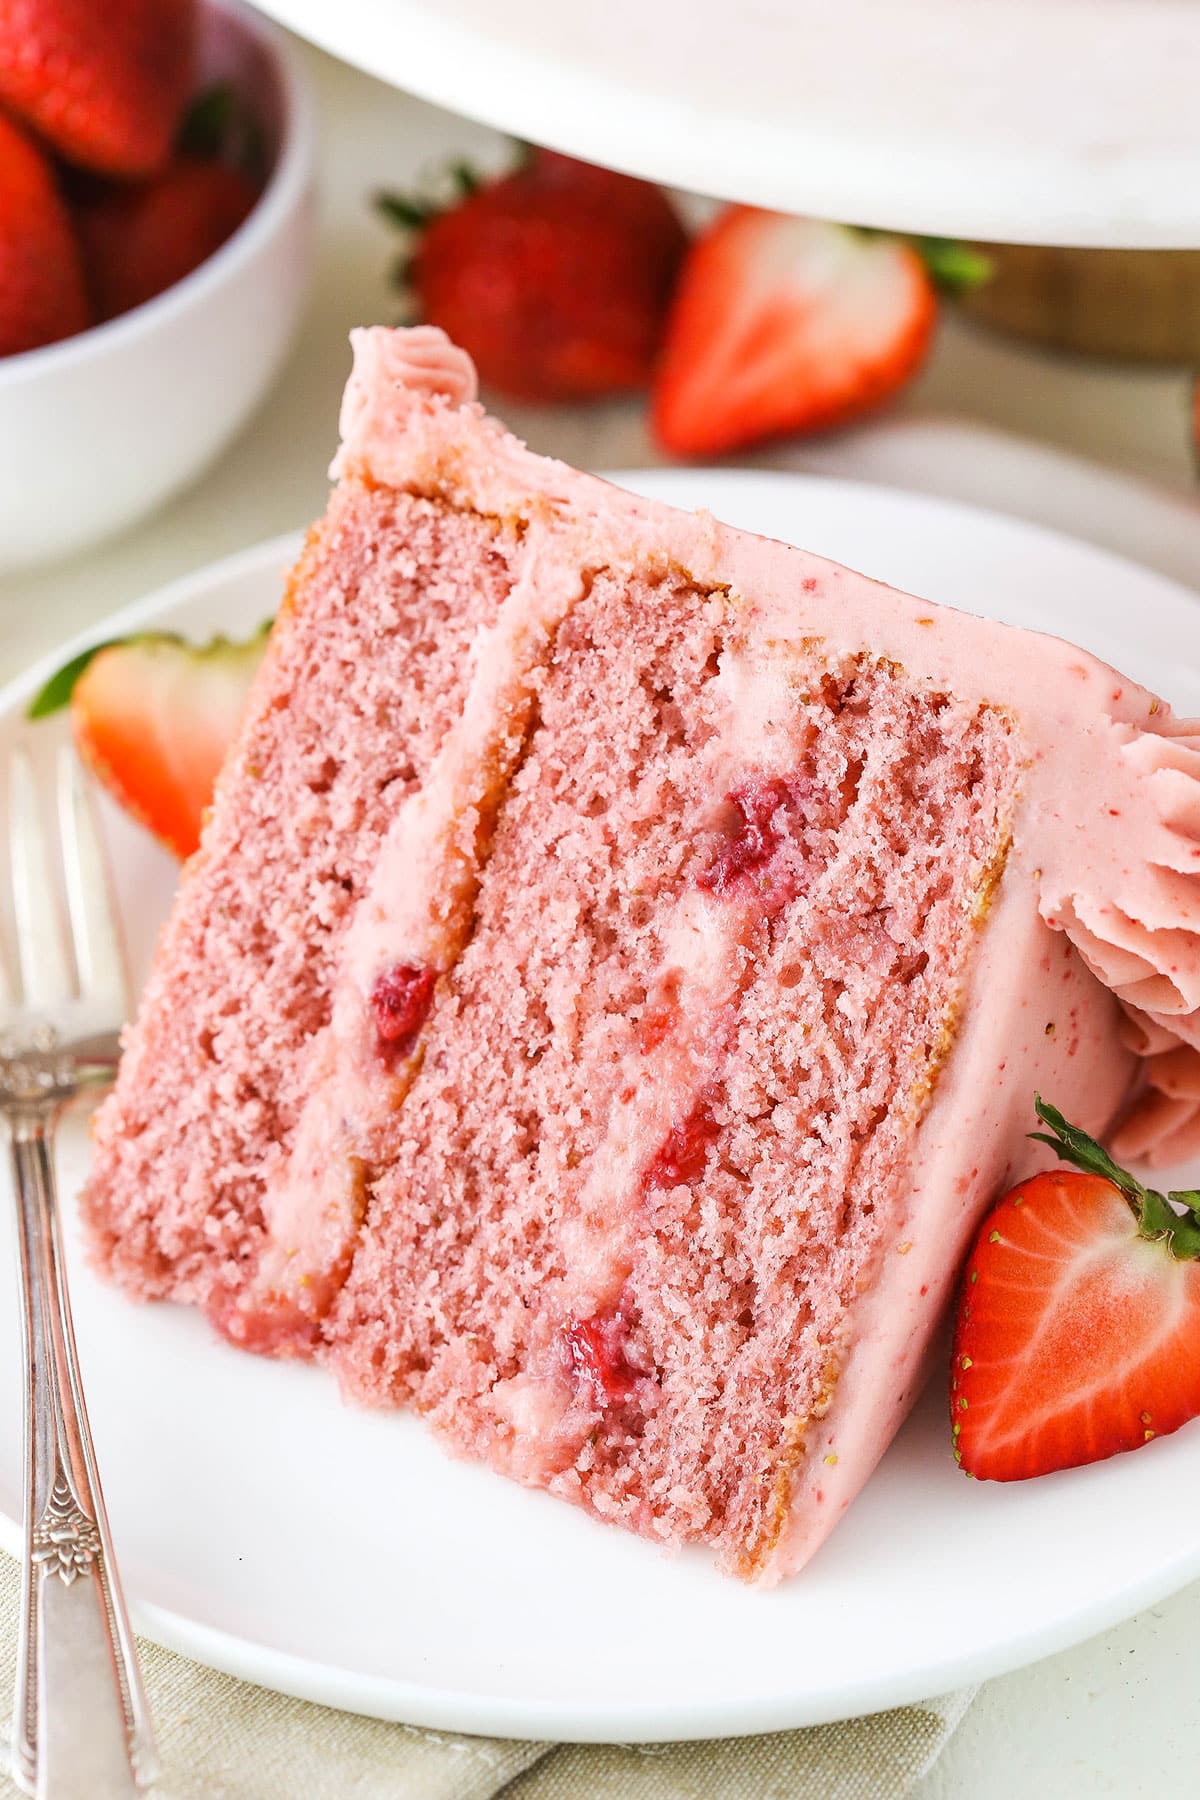 A slice of Homemade Strawberry Cake next to a fork and cut strawberries on a white plate